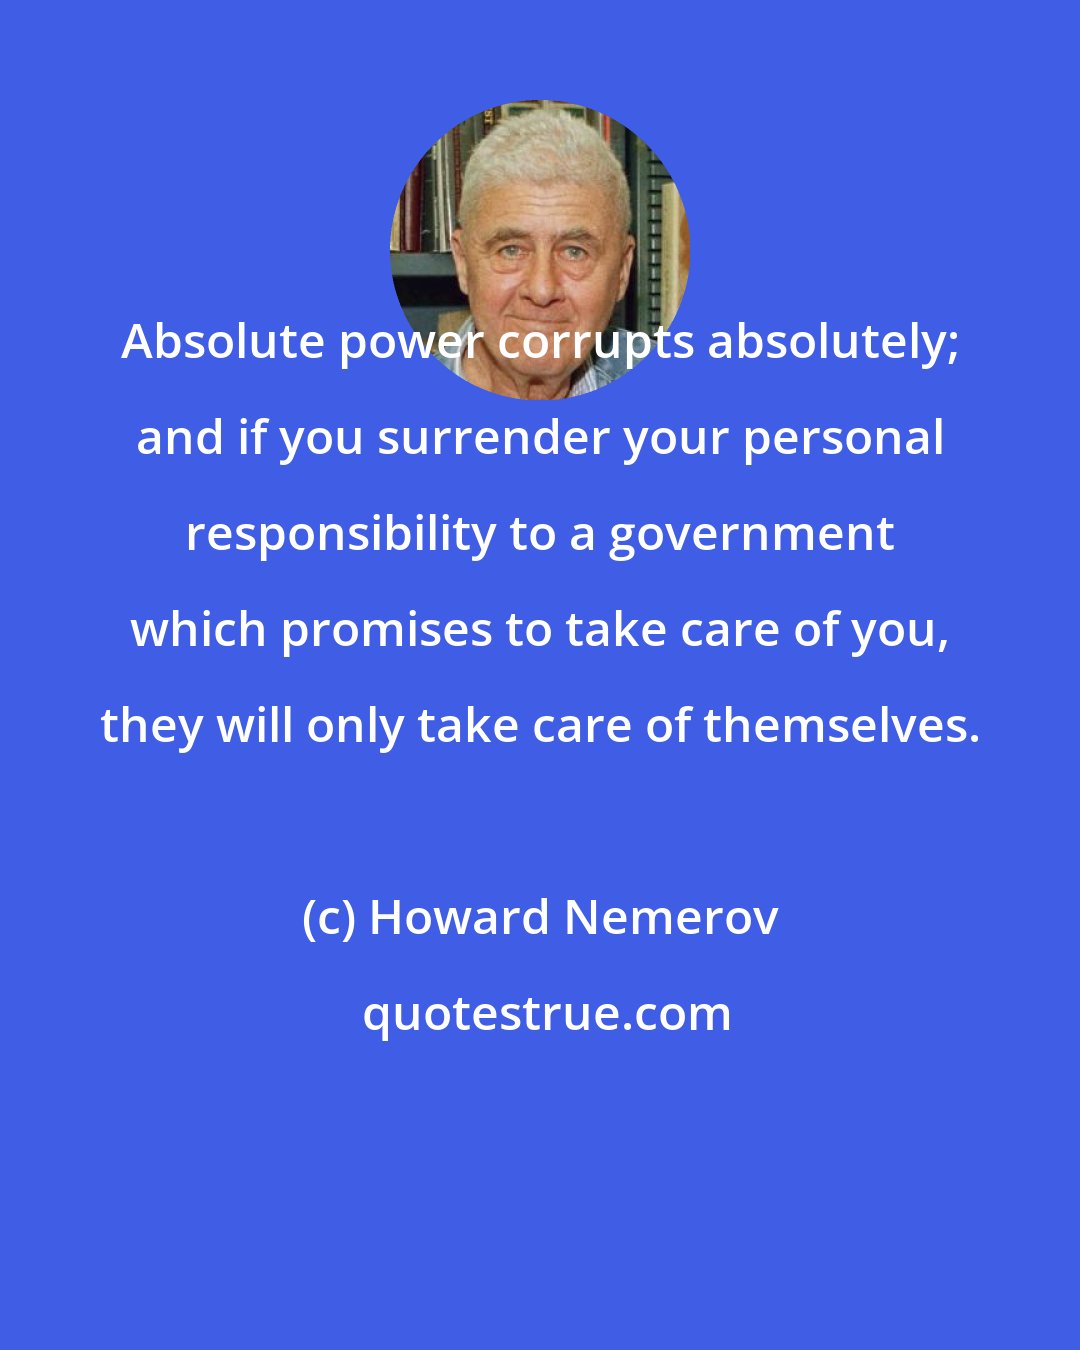 Howard Nemerov: Absolute power corrupts absolutely; and if you surrender your personal responsibility to a government which promises to take care of you, they will only take care of themselves.